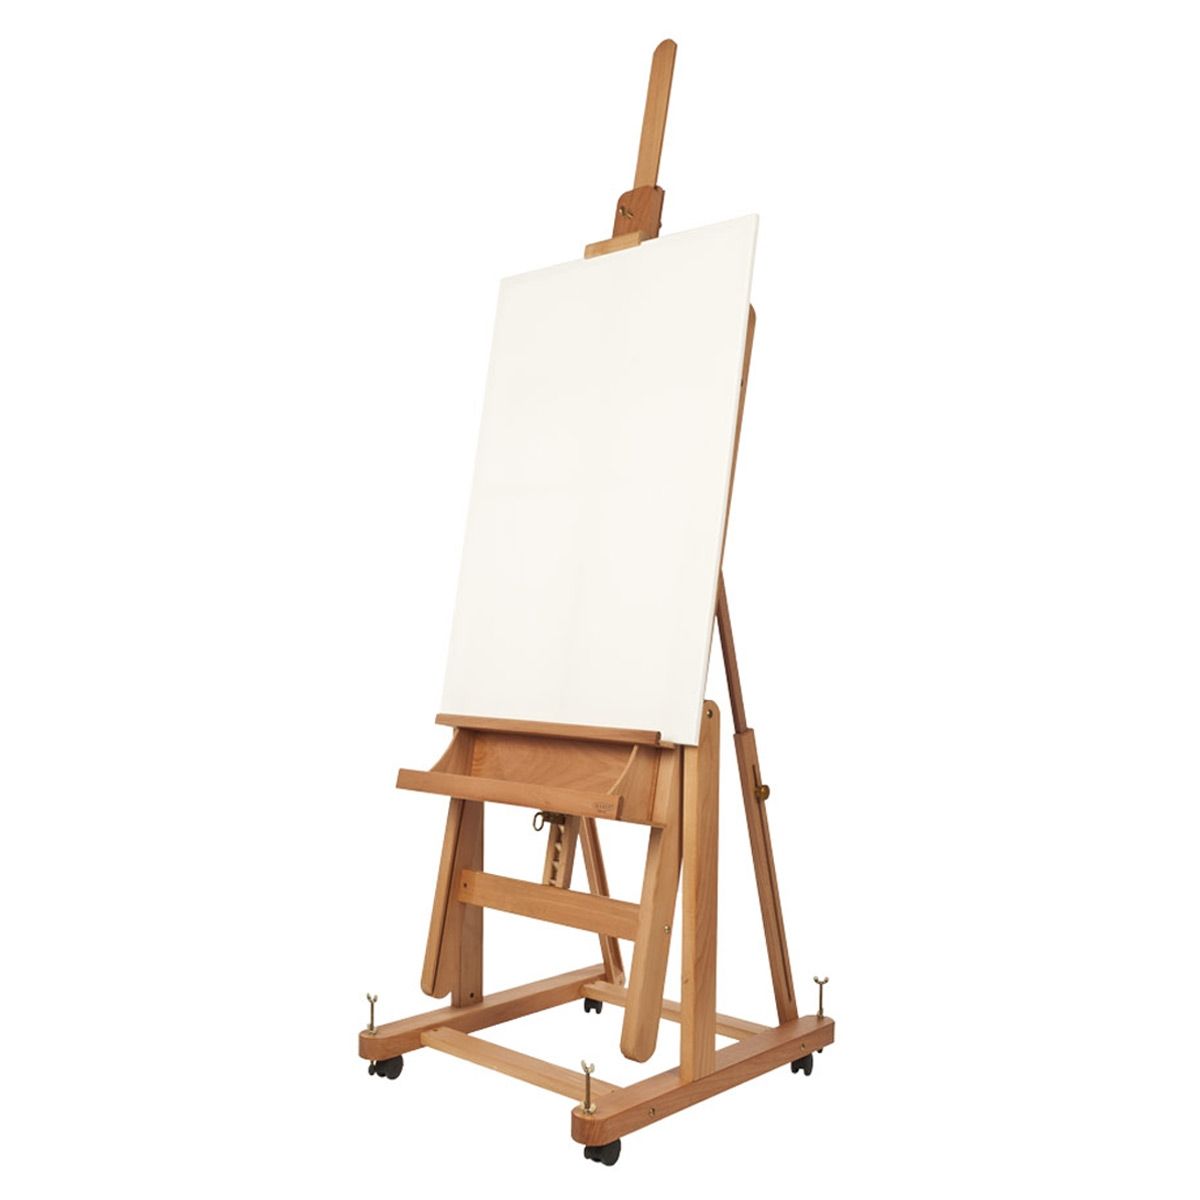 The M­18D accepts canvases up to 88" high